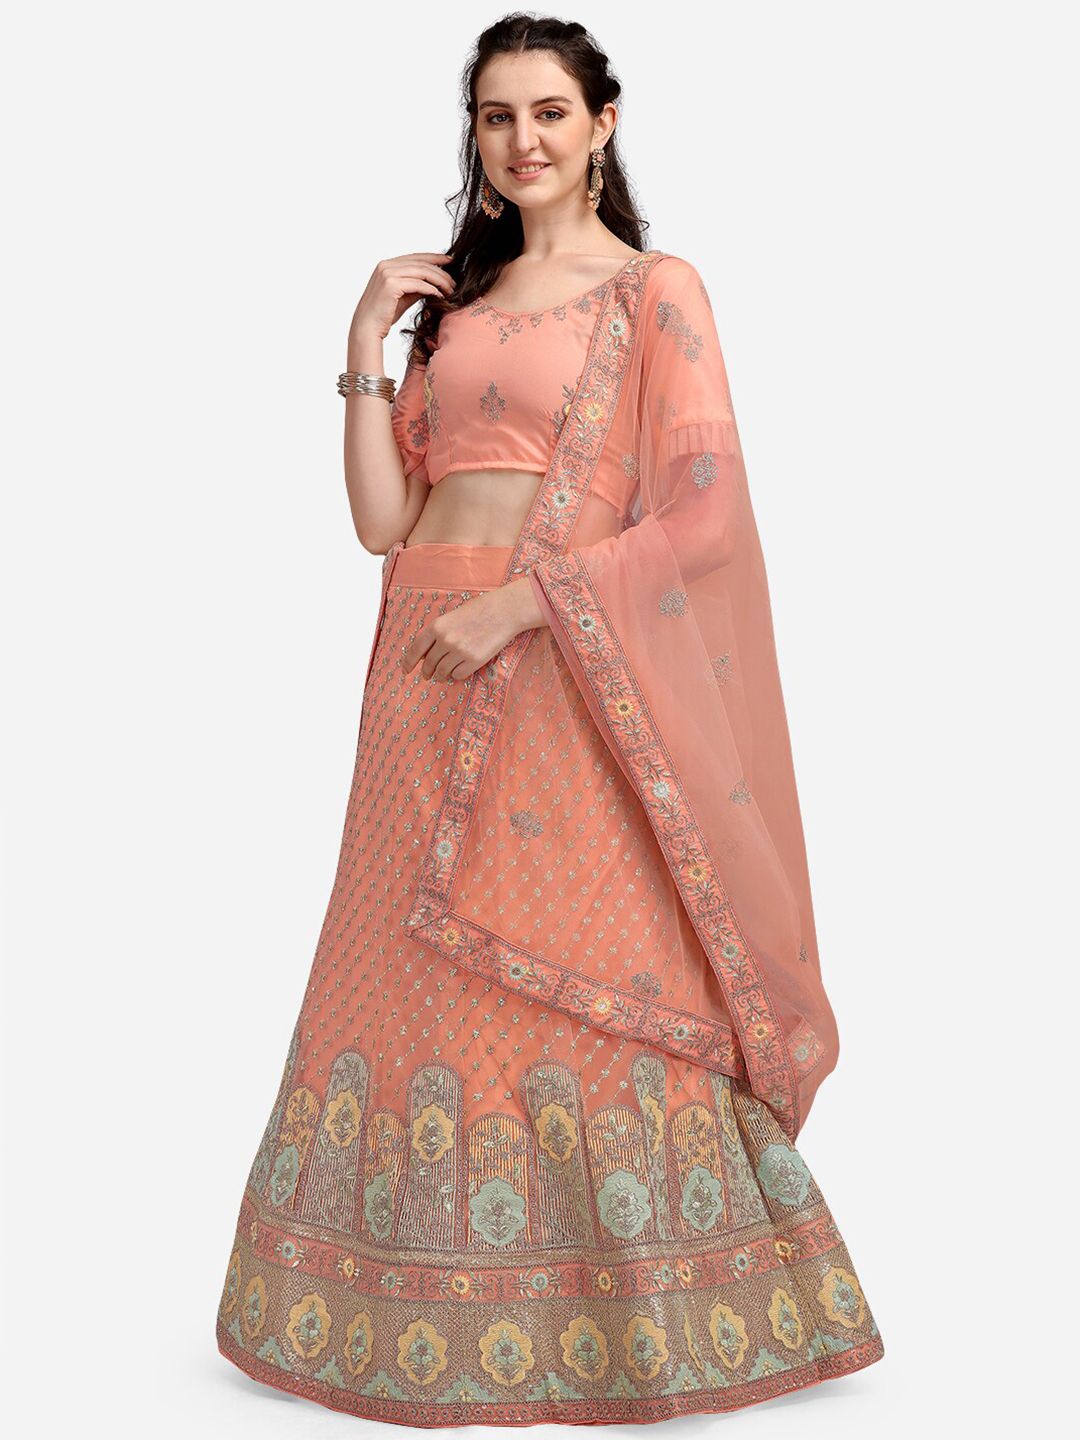 V SALES Peach-Coloured & Yellow Embroidered Sequinned Semi-Stitched Lehenga & Unstitched Blouse With Dupatta Price in India